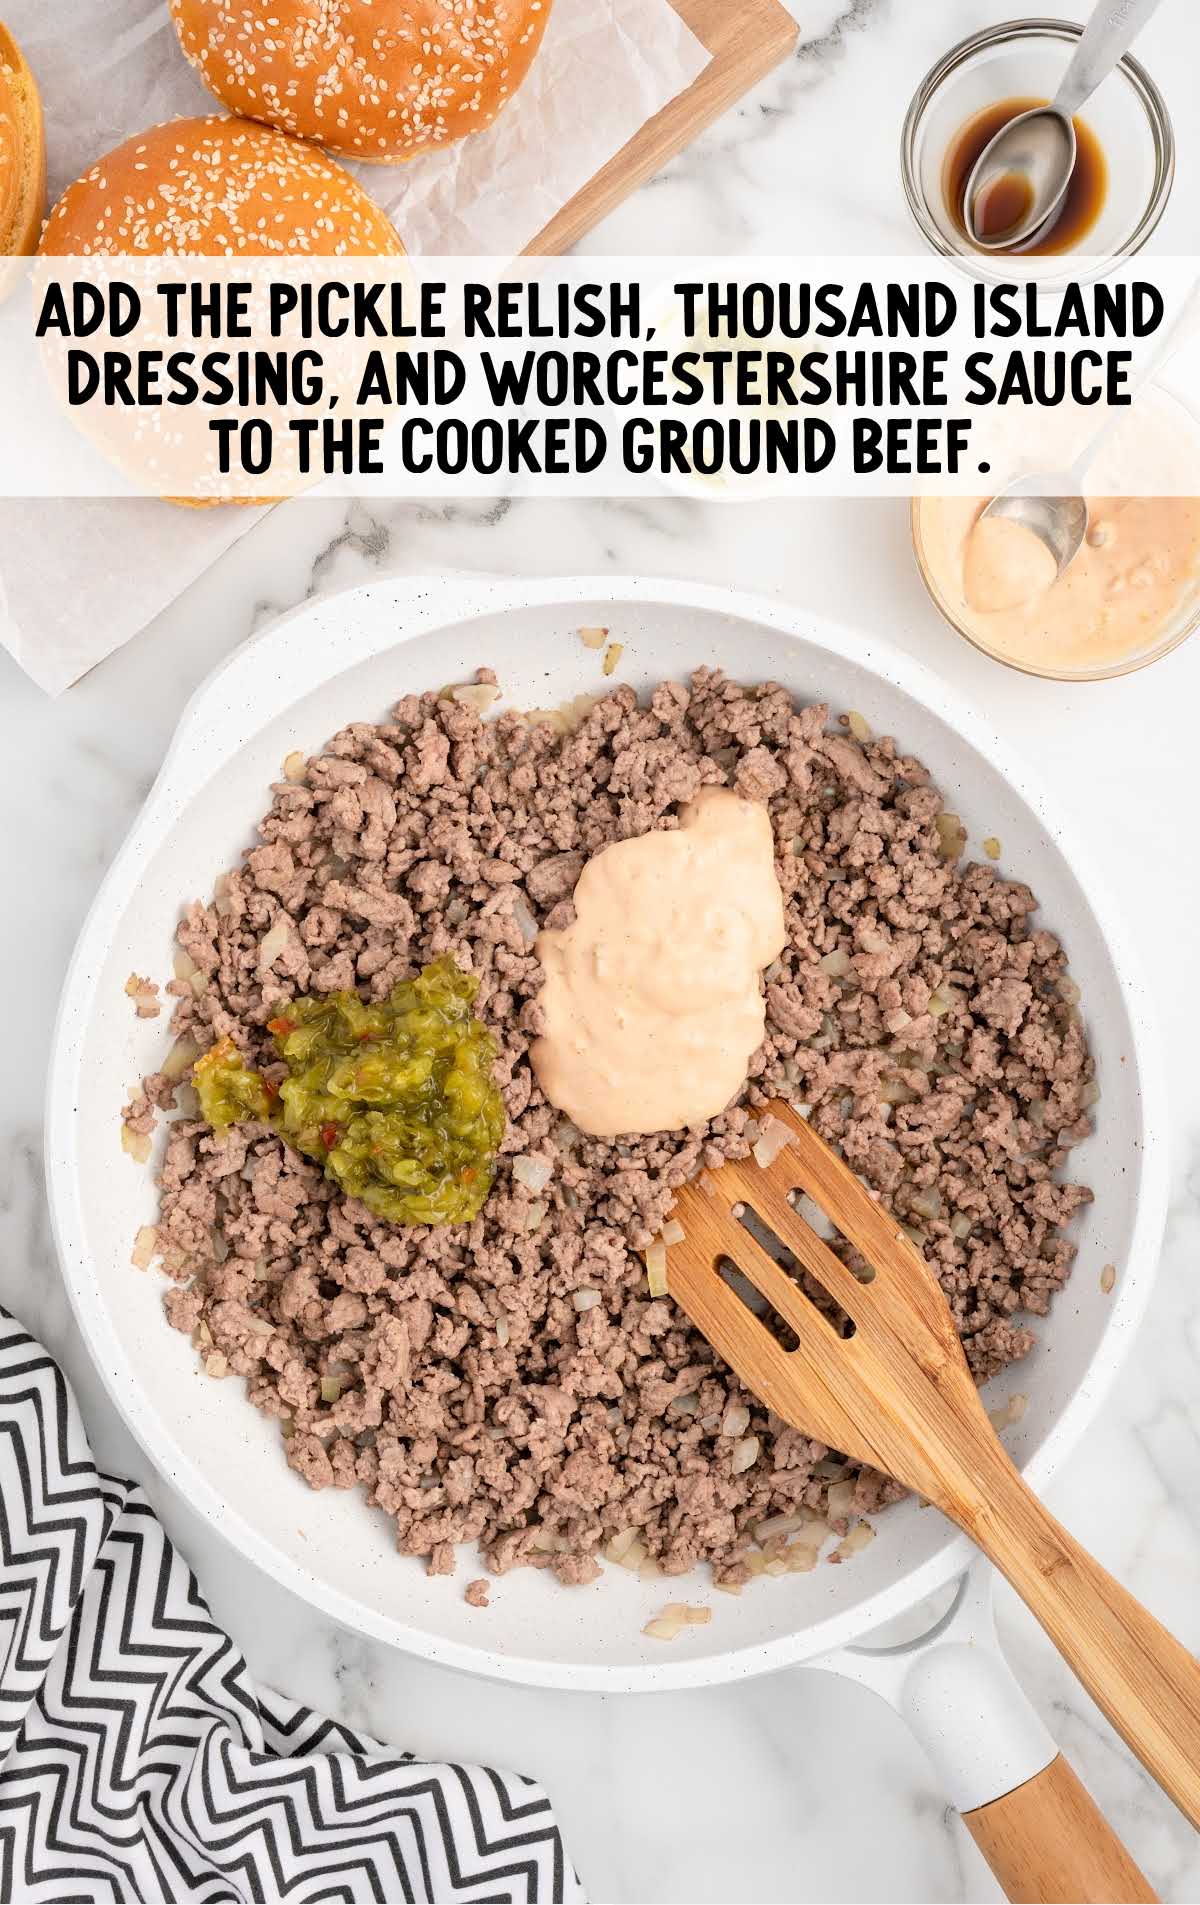 pickle relish, Thousand Island dressing, and Worcestershire sauce added to the cooked ground beef in a skillet